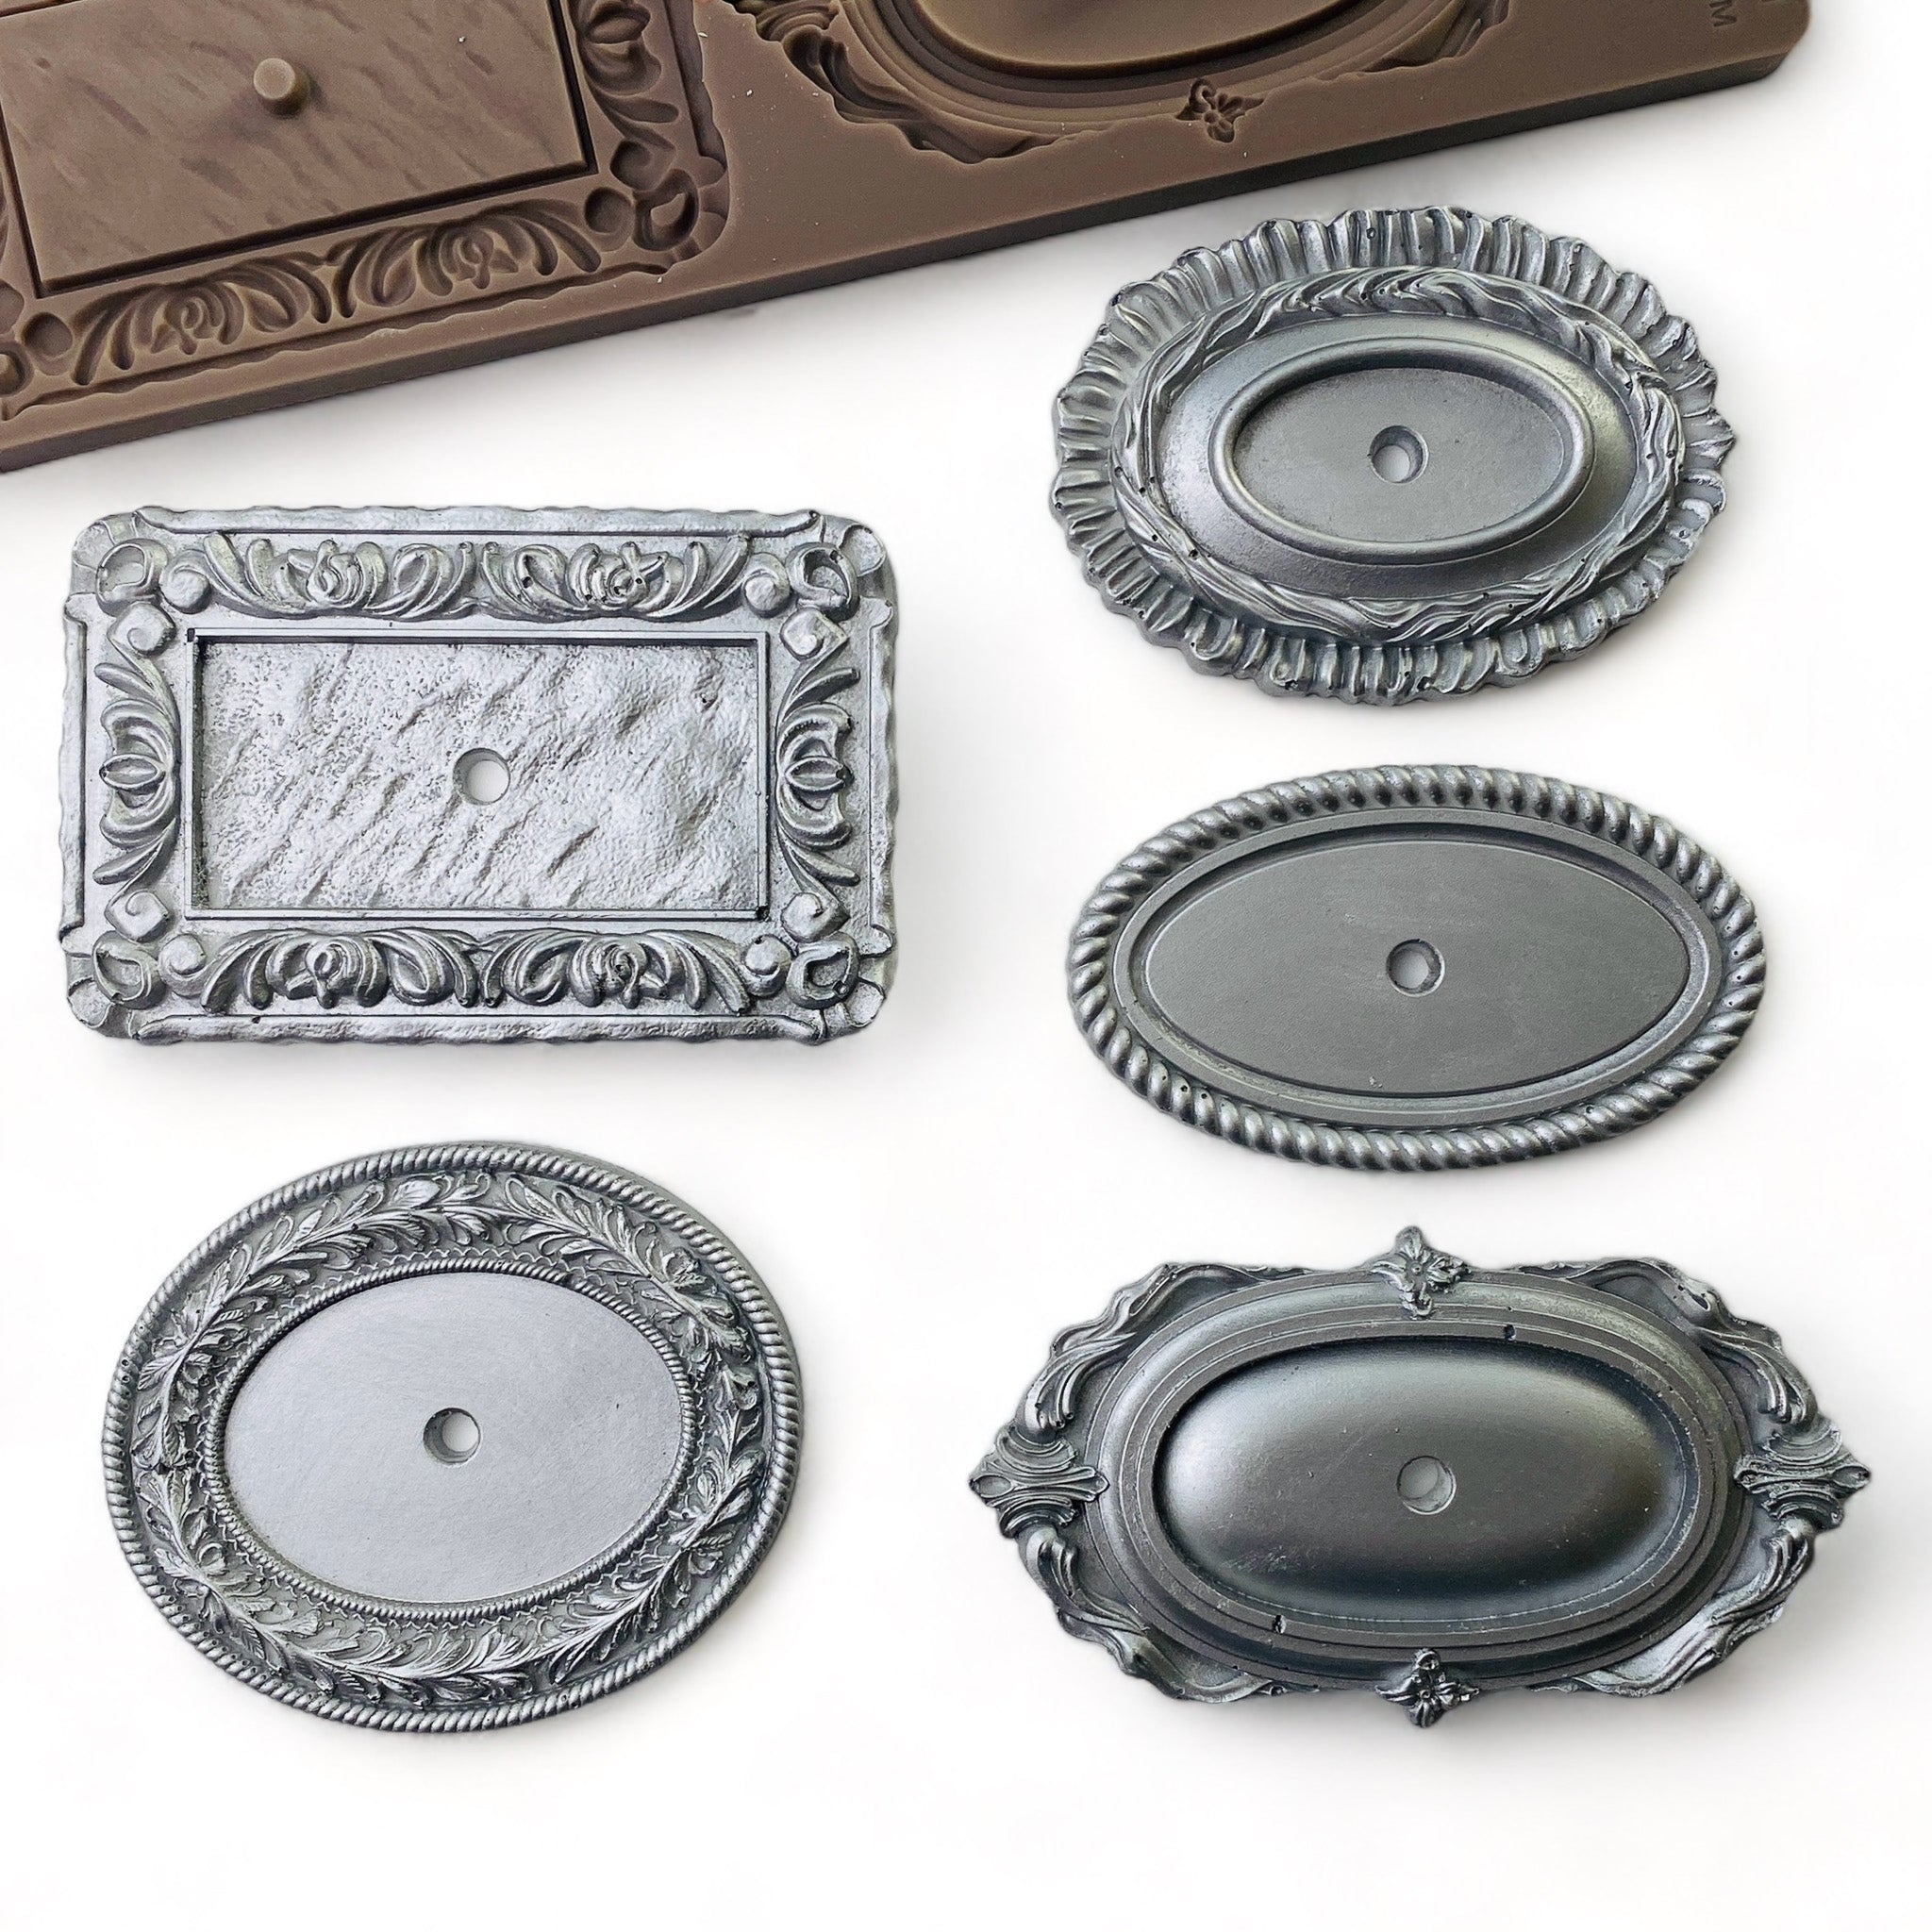 Silver colored silicone mold castings of 5 ornate drawer pull plates are against a white background.